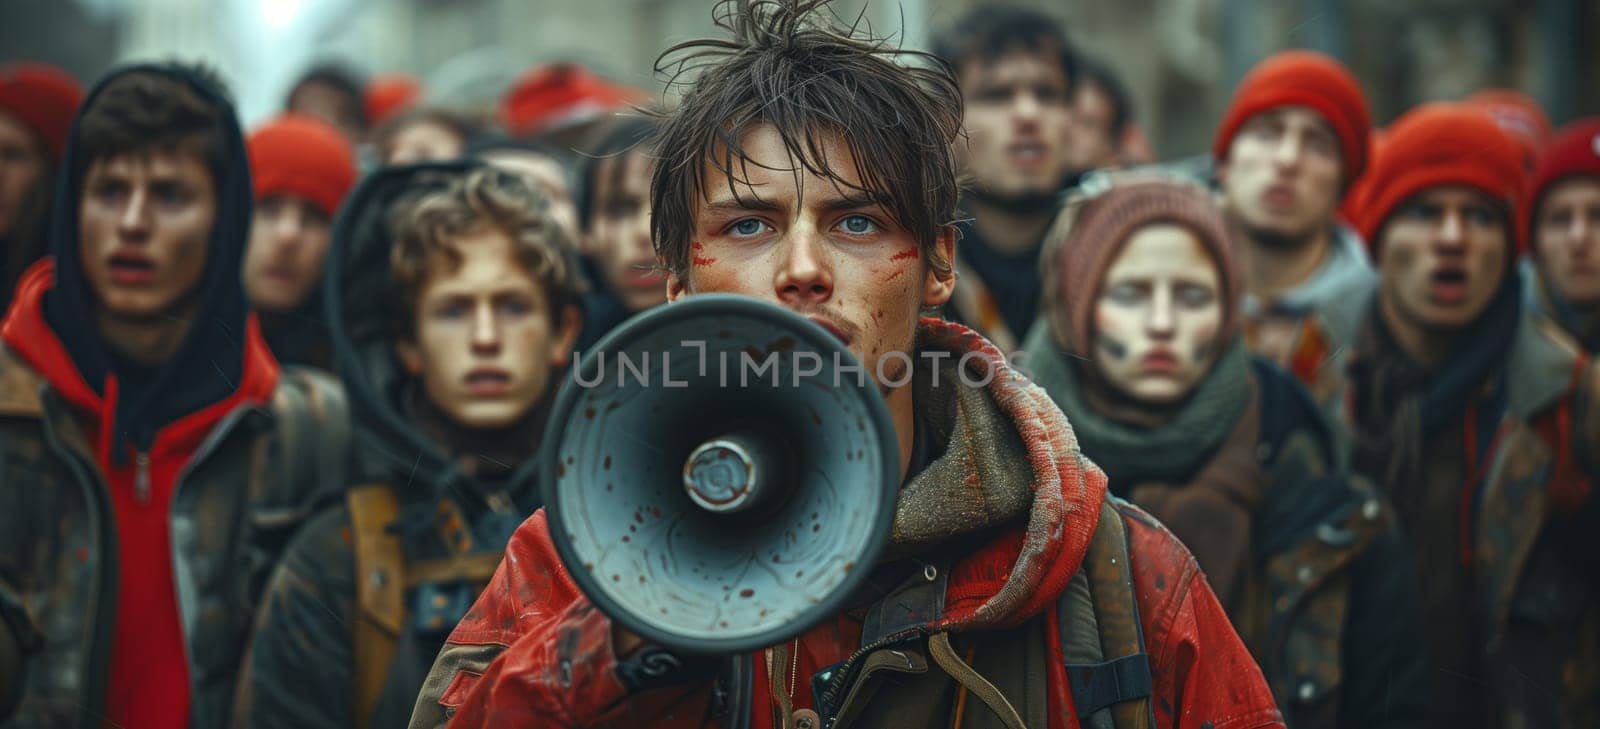 A man dressed as a fictional character from a movie is holding a megaphone in front of a crowd at an art event. The crowd is having fun sharing travel stories about the jungle